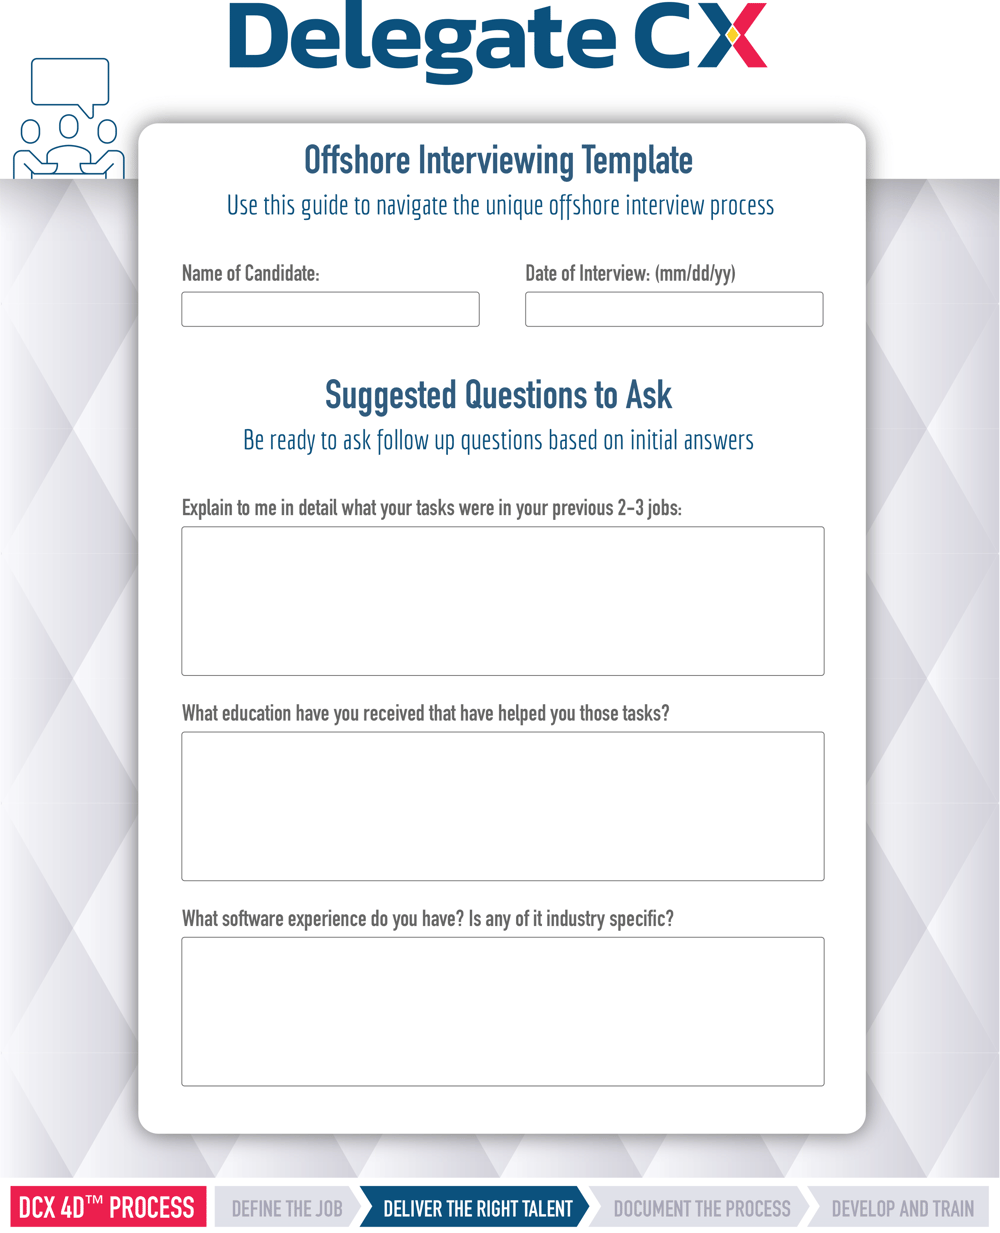 Offshore Interviewing Template form